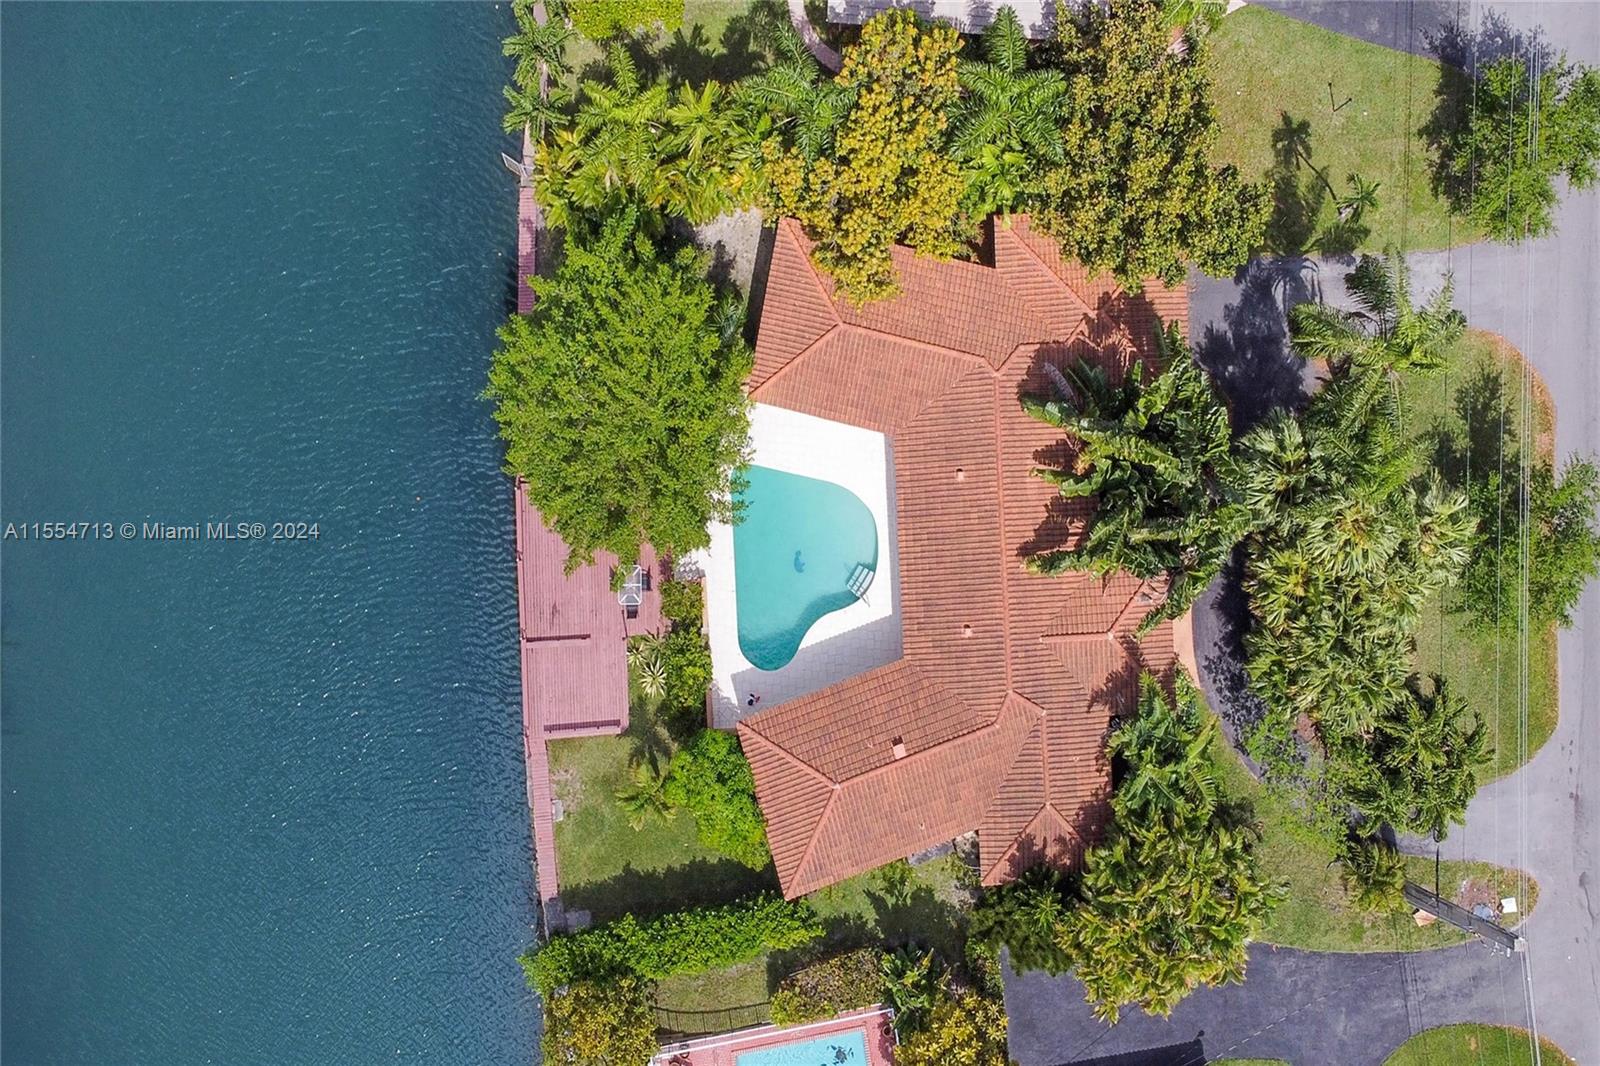 ATTENTION BOATERS & INVESTORS – waterfront homes in Coral Gables and Coconut Grove with ocean access have sold for an average of $9.7M over the last year with only two out of 27 selling for under $3M. If you have been looking for a waterfront home with ocean access under $3M, this is the rare opportunity you have been waiting for! Enjoy 125’ of waterfrontage with wood deck and pool overlooking the wide canal. Great floor plan with four bedrooms and large open entertaining areas. Amazing location near University of Miami, downtown Coral Gables, and Coconut Grove with top schools, shopping, restaurants, and entertainment, and Downtown Miami and Miami Beach a short drive. Roof approximately 7 years old. Seawall recently reinforced. Two car garage. This is your opportunity!